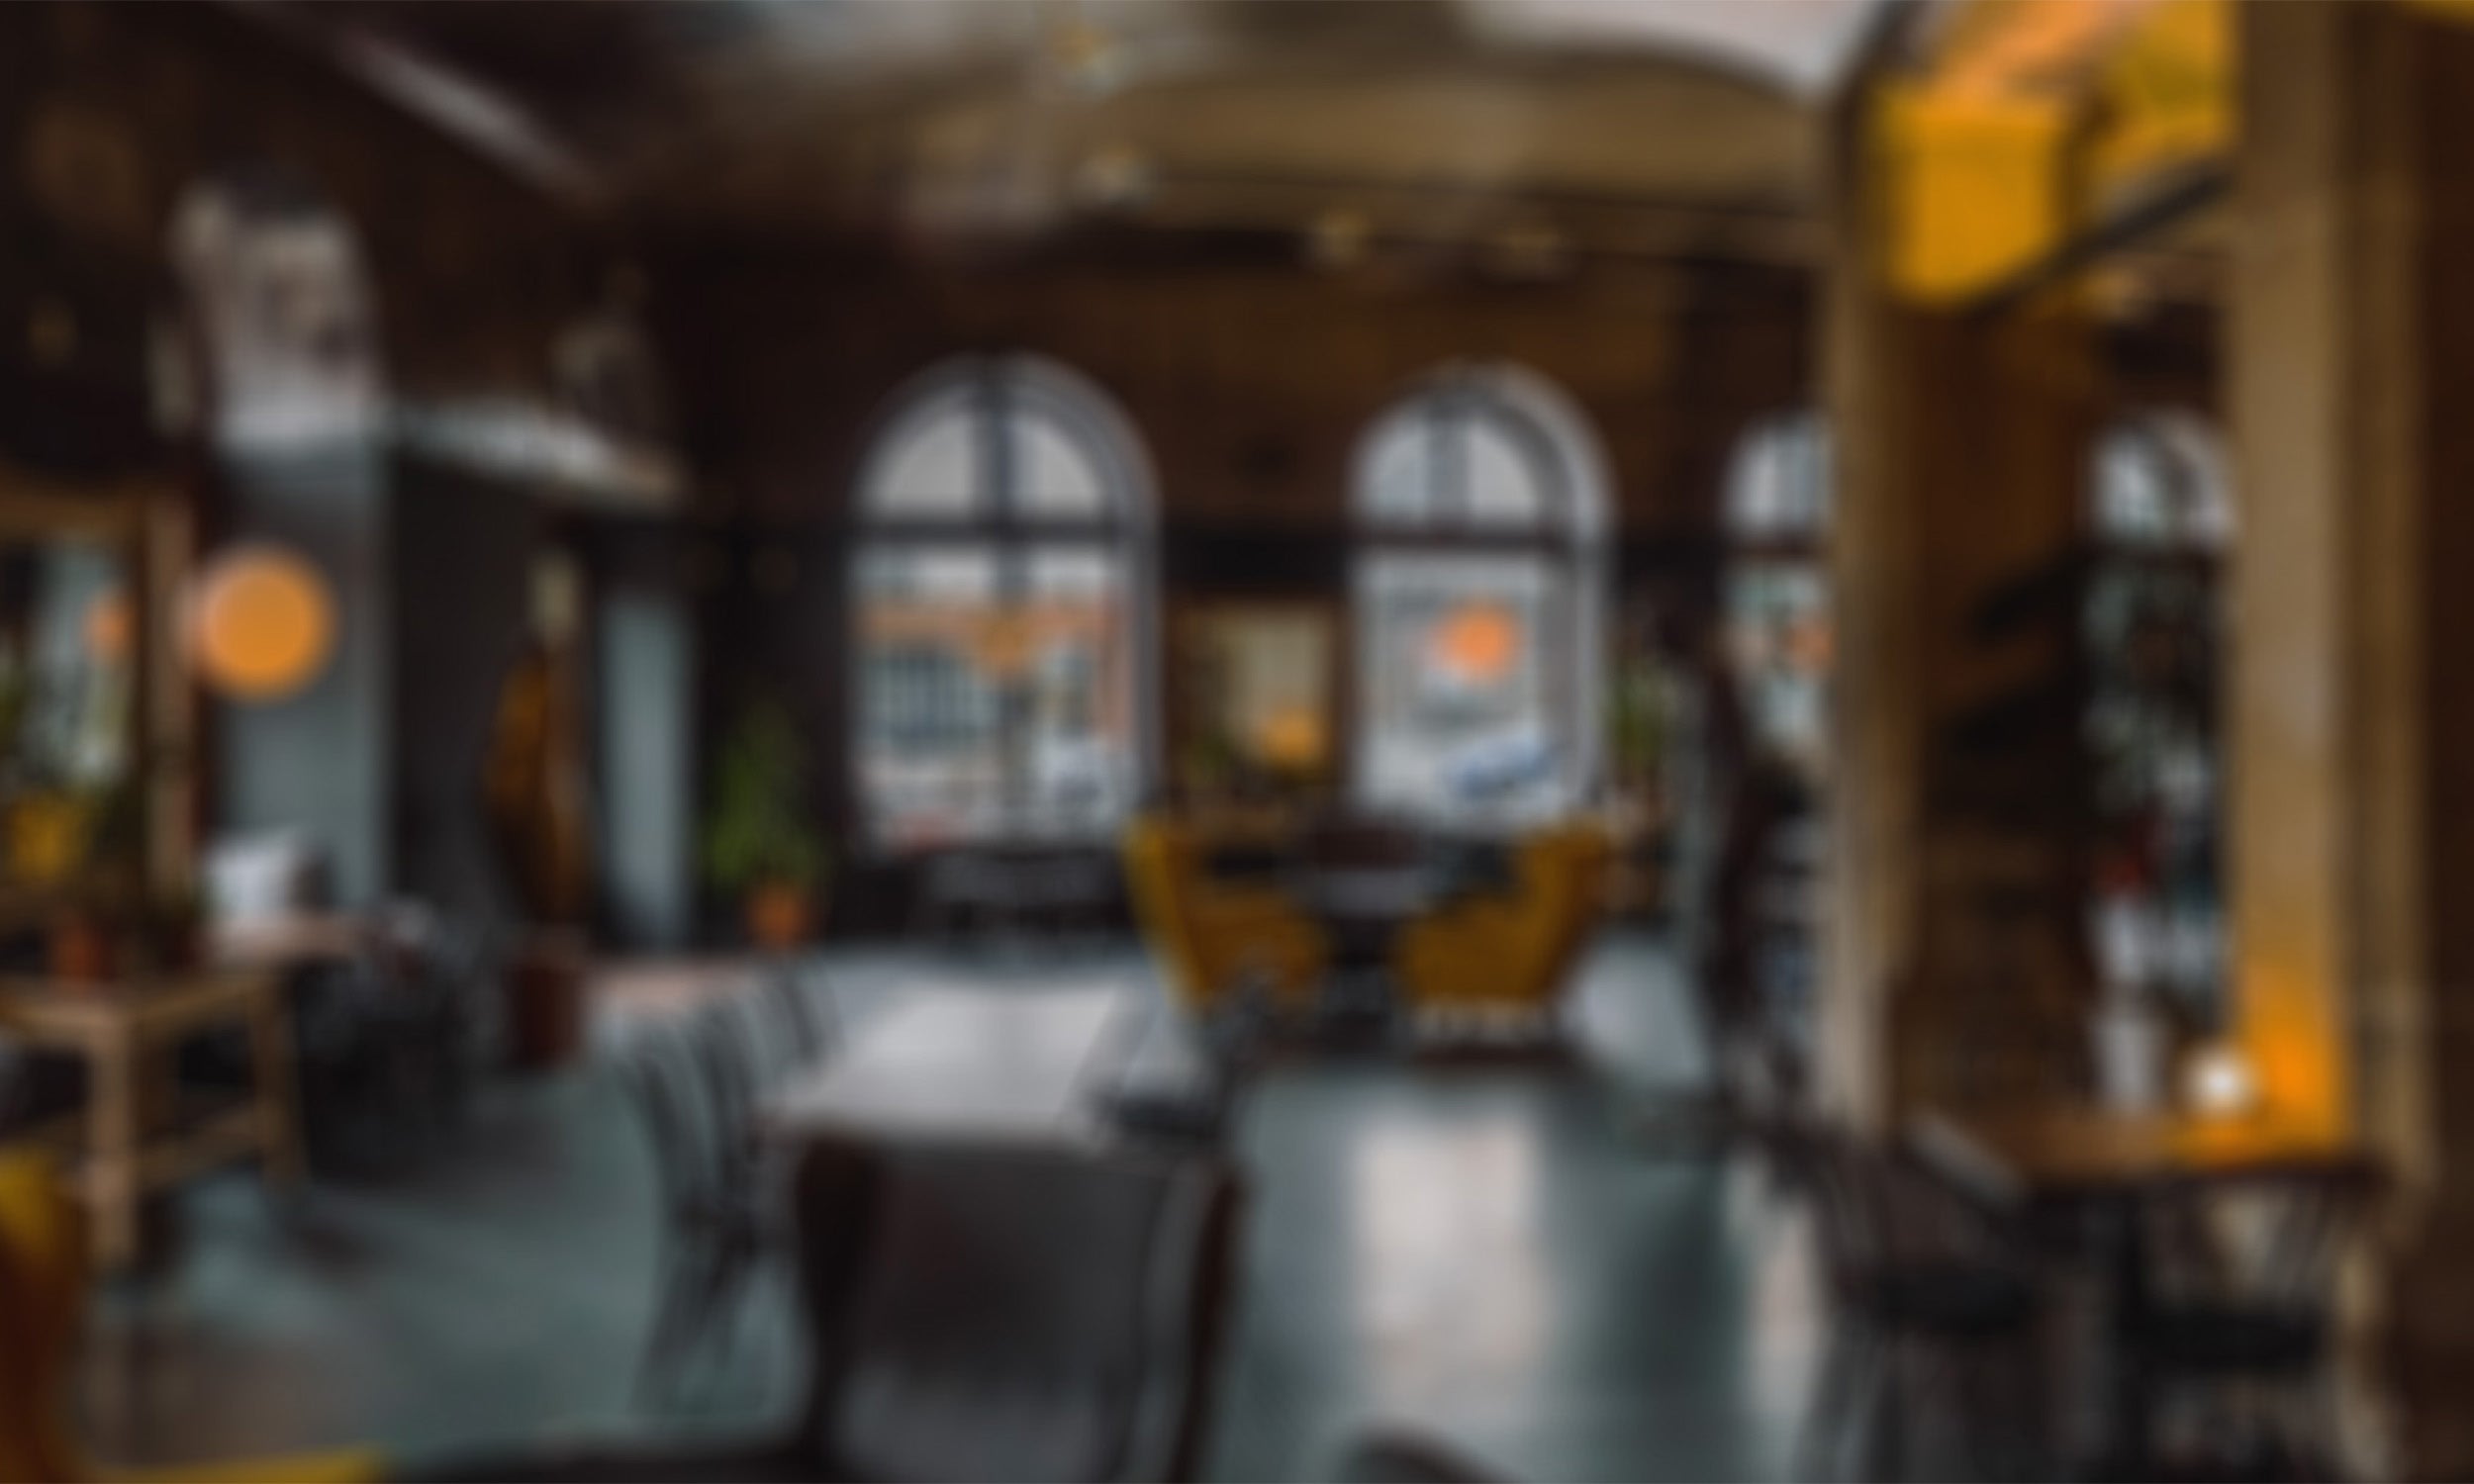 Image of an out of focus coffee shop lobby.